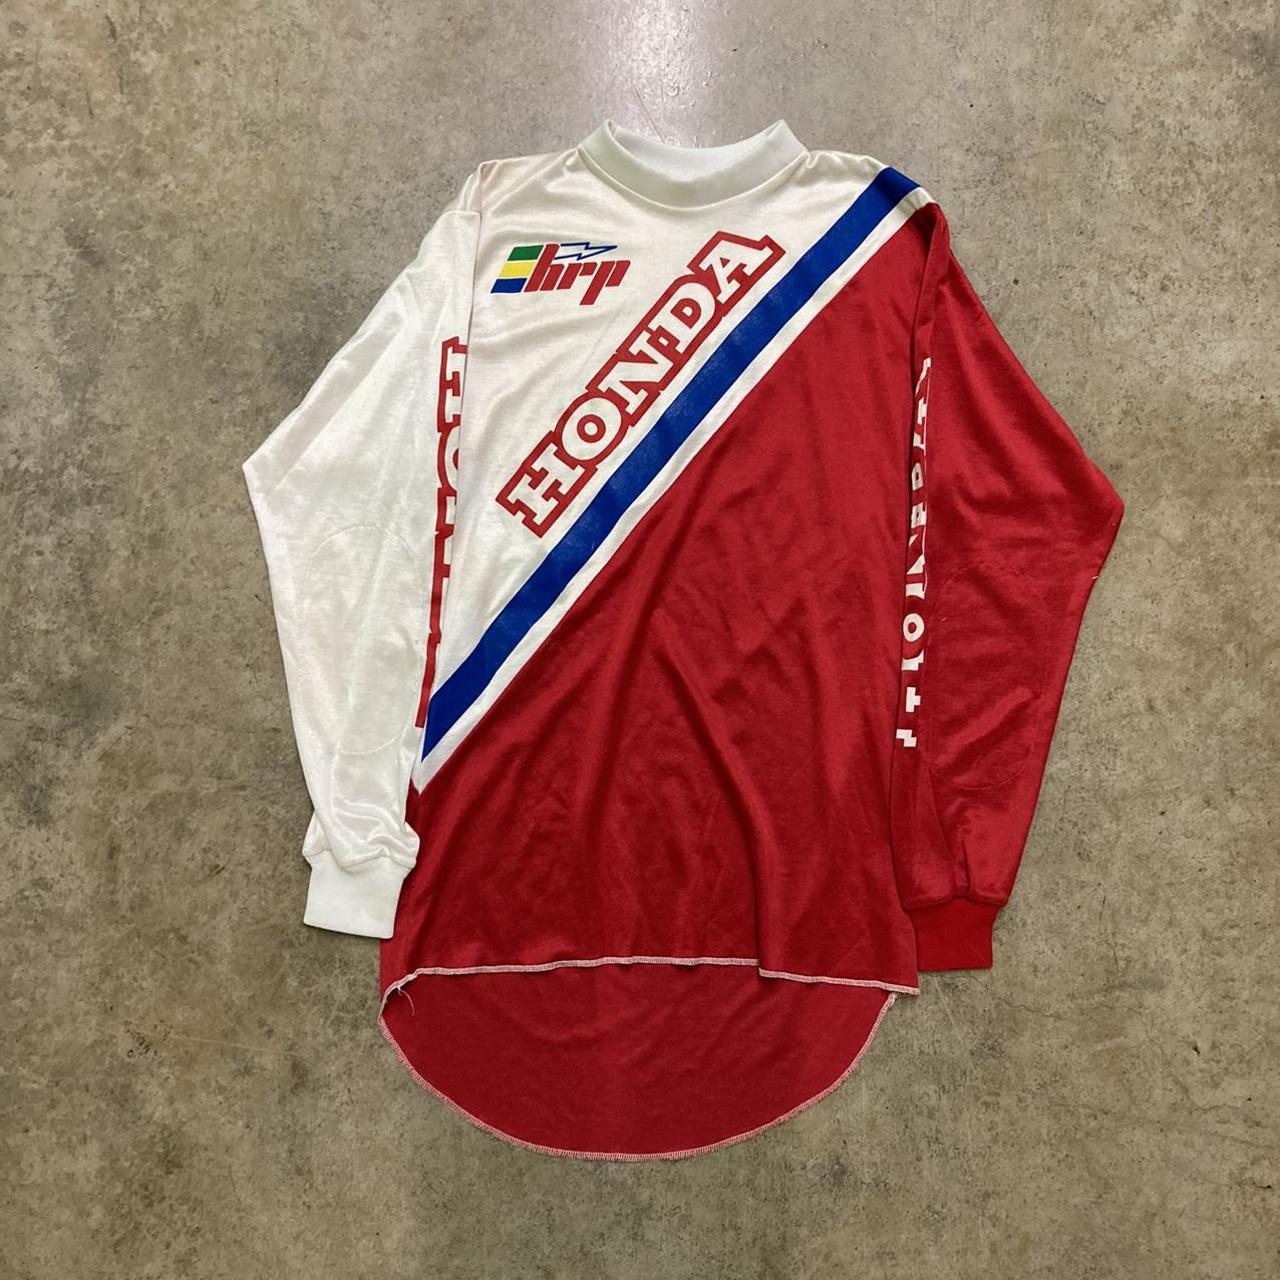 1980s Honda Racing jersey Cool one Pit to pit:... - Depop